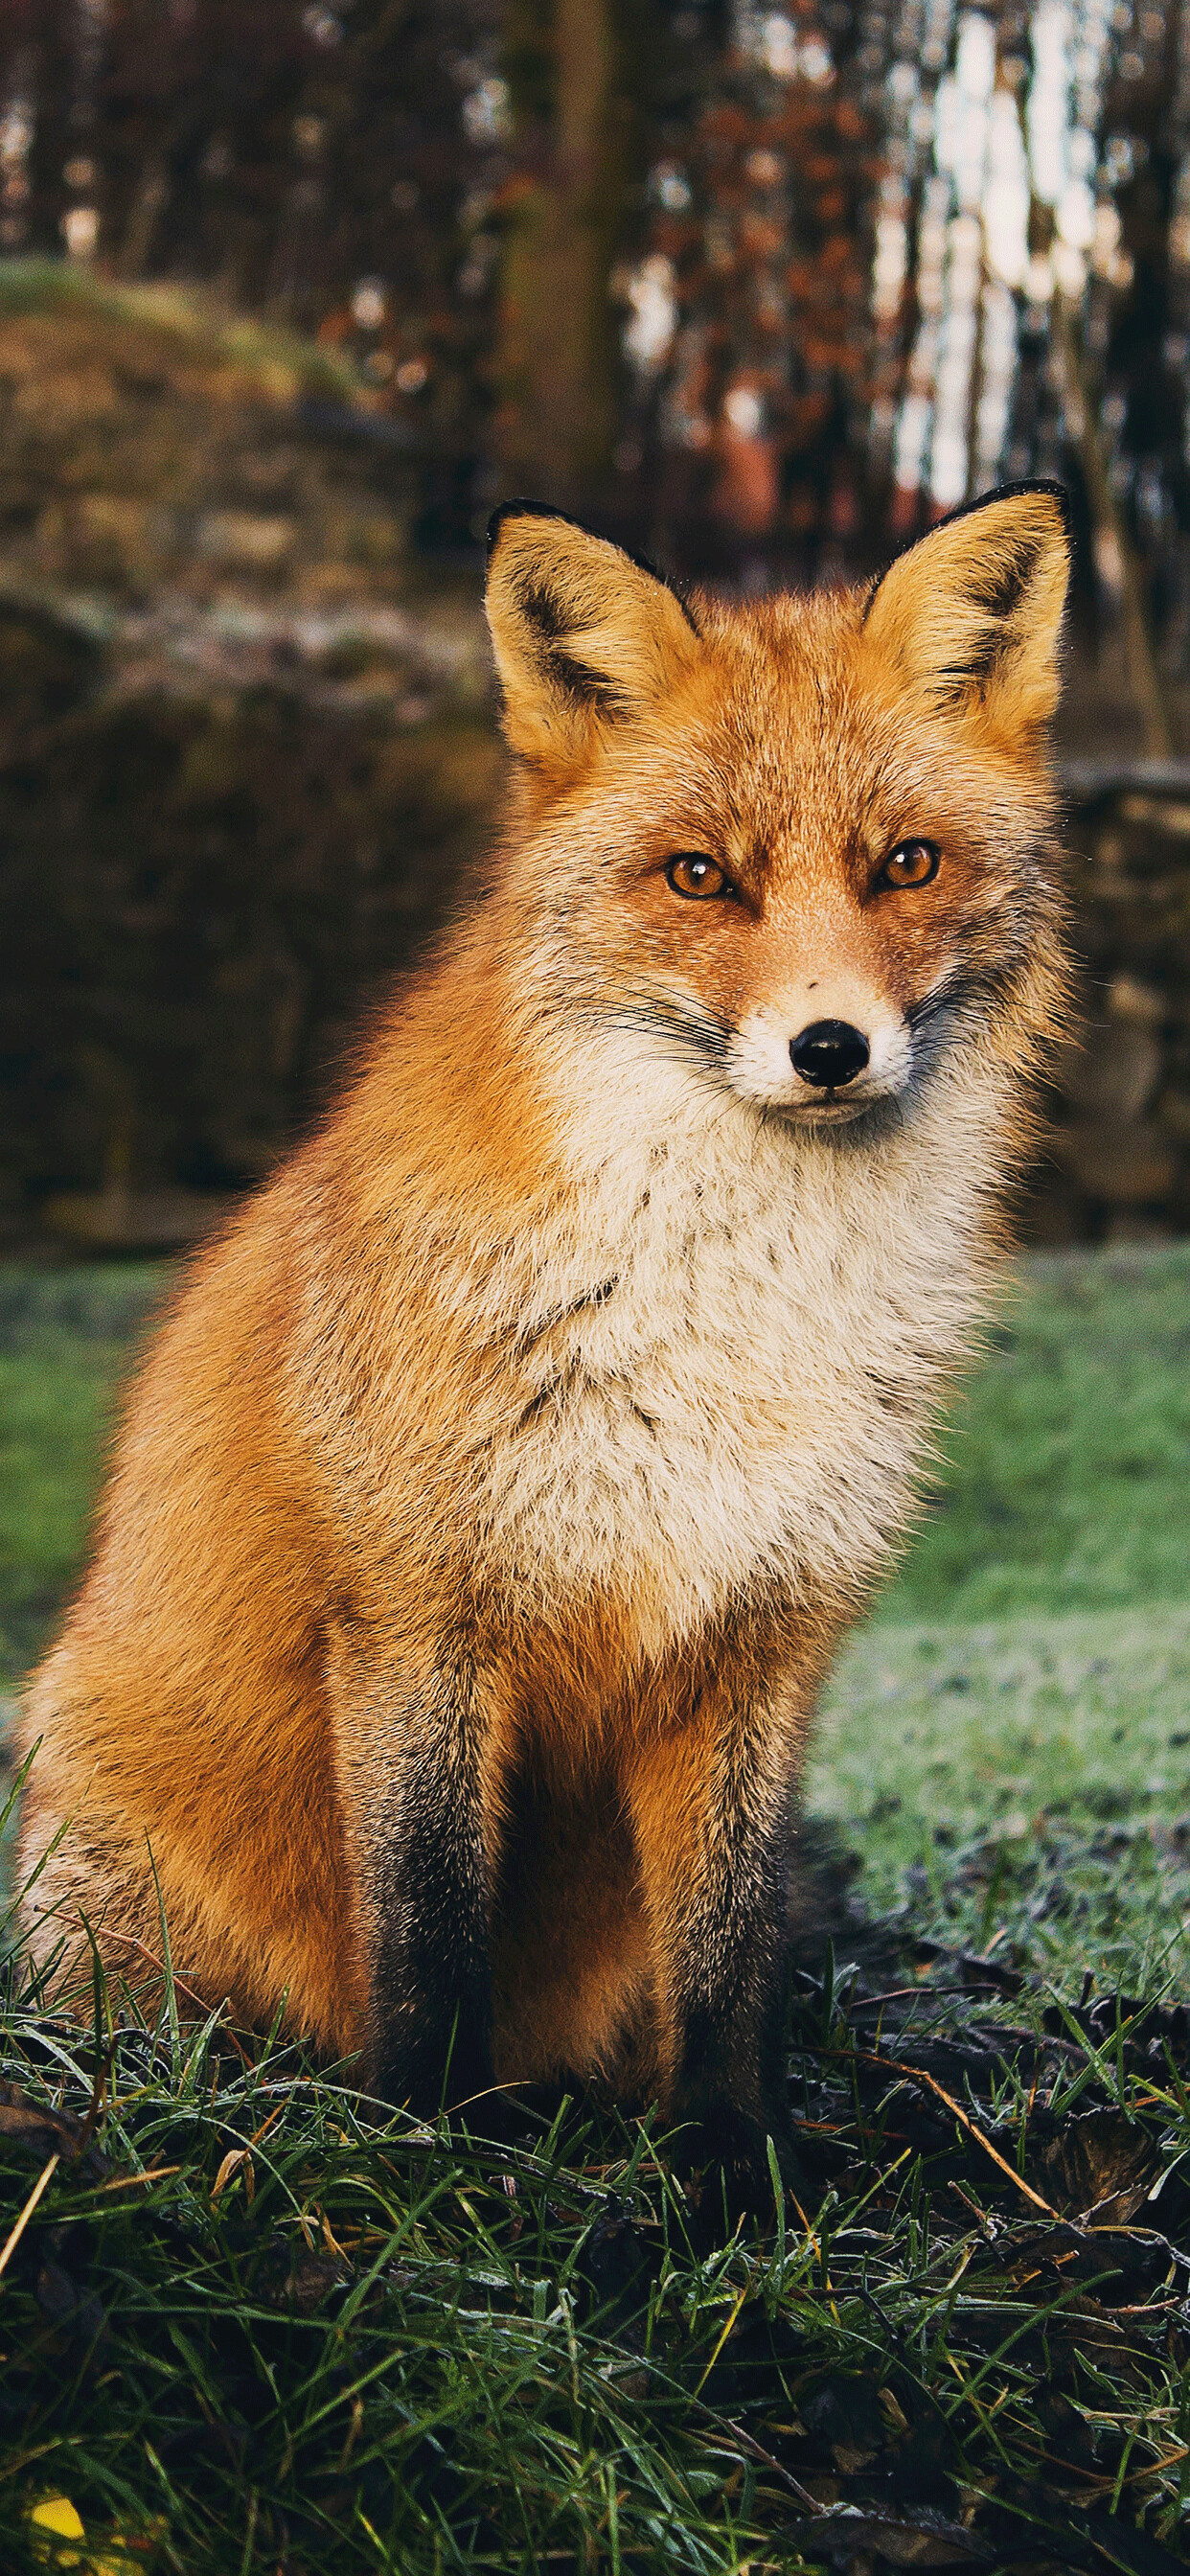 Fox: Orange-red dogs with bushy tails, Famed for their cunning and stealth. 1250x2690 HD Wallpaper.